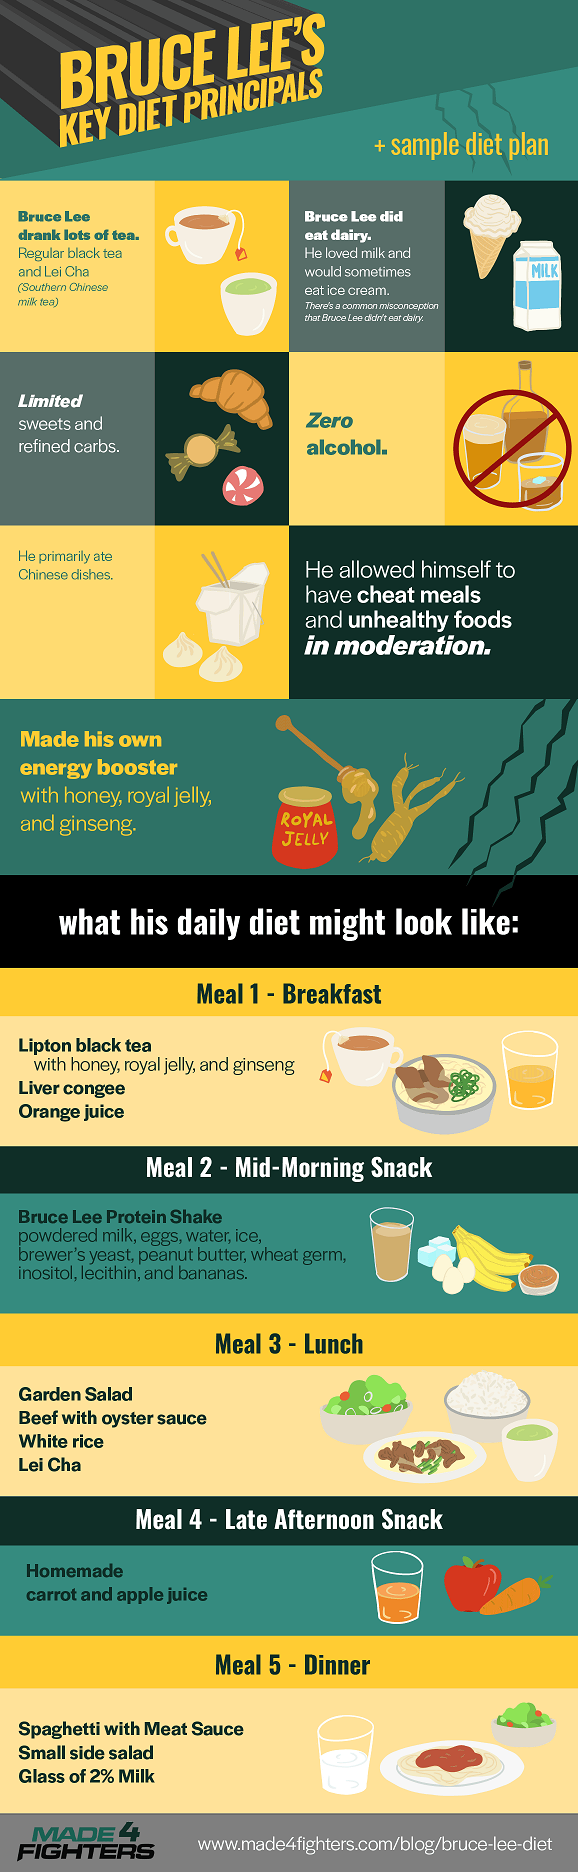 How The “Bruce Lee Diet” Can Help You Get Fit